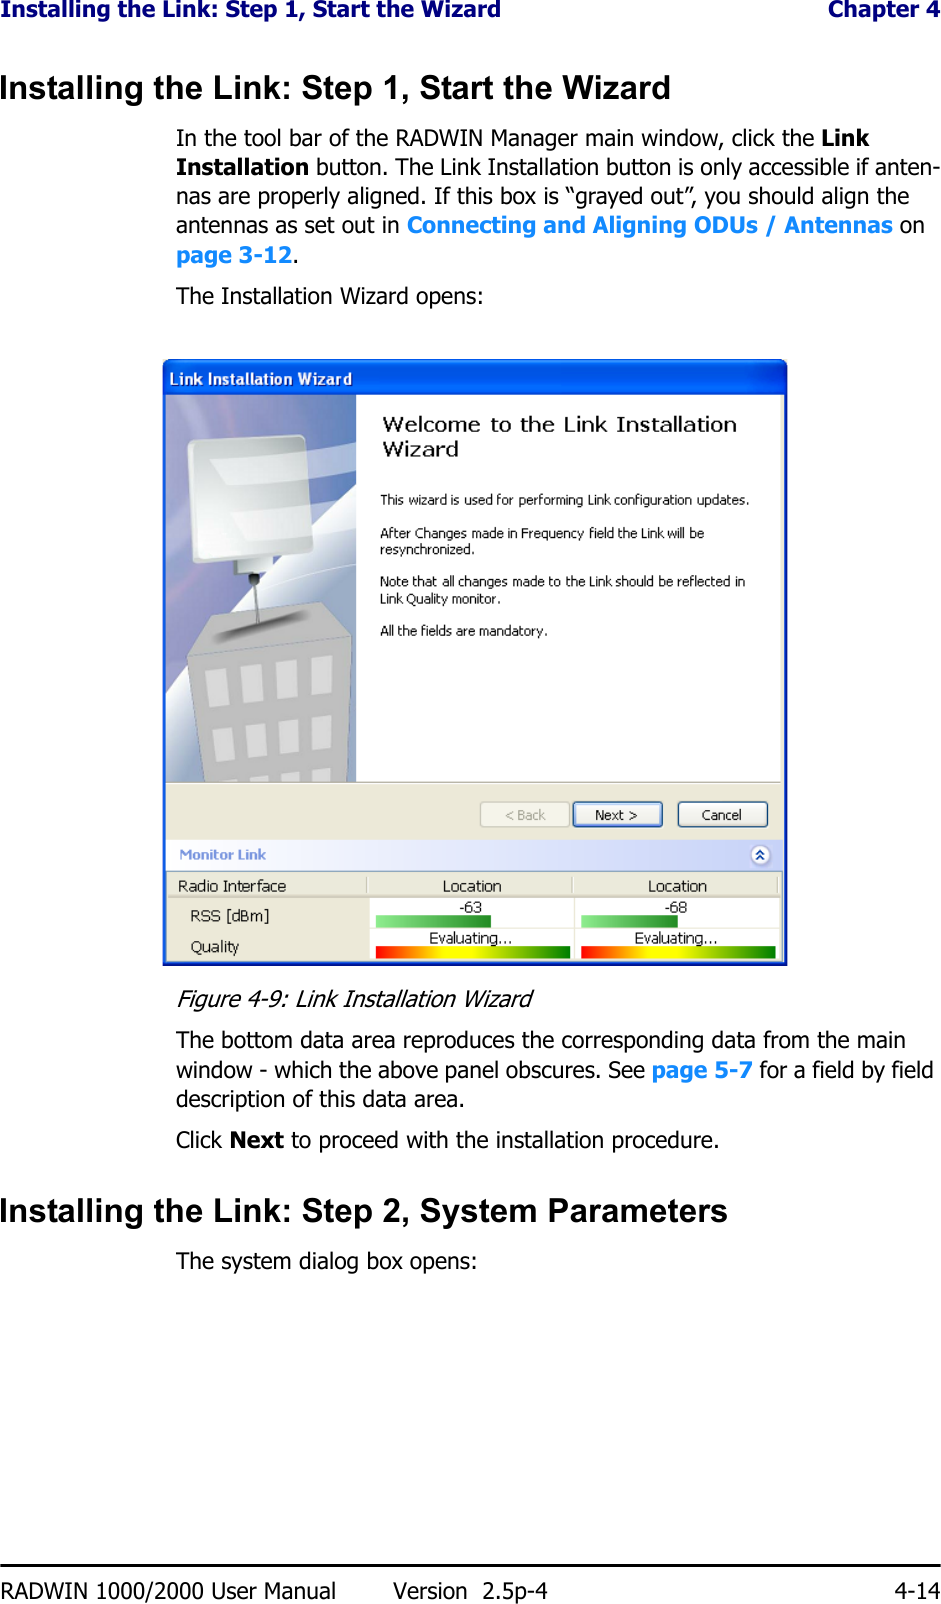 Installing the Link: Step 1, Start the Wizard  Chapter 4RADWIN 1000/2000 User Manual Version  2.5p-4 4-14Installing the Link: Step 1, Start the WizardIn the tool bar of the RADWIN Manager main window, click the Link Installation button. The Link Installation button is only accessible if anten-nas are properly aligned. If this box is “grayed out”, you should align the antennas as set out in Connecting and Aligning ODUs / Antennas on page 3-12.The Installation Wizard opens:Figure 4-9: Link Installation WizardThe bottom data area reproduces the corresponding data from the main window - which the above panel obscures. See page 5-7 for a field by field description of this data area.Click Next to proceed with the installation procedure.Installing the Link: Step 2, System ParametersThe system dialog box opens: